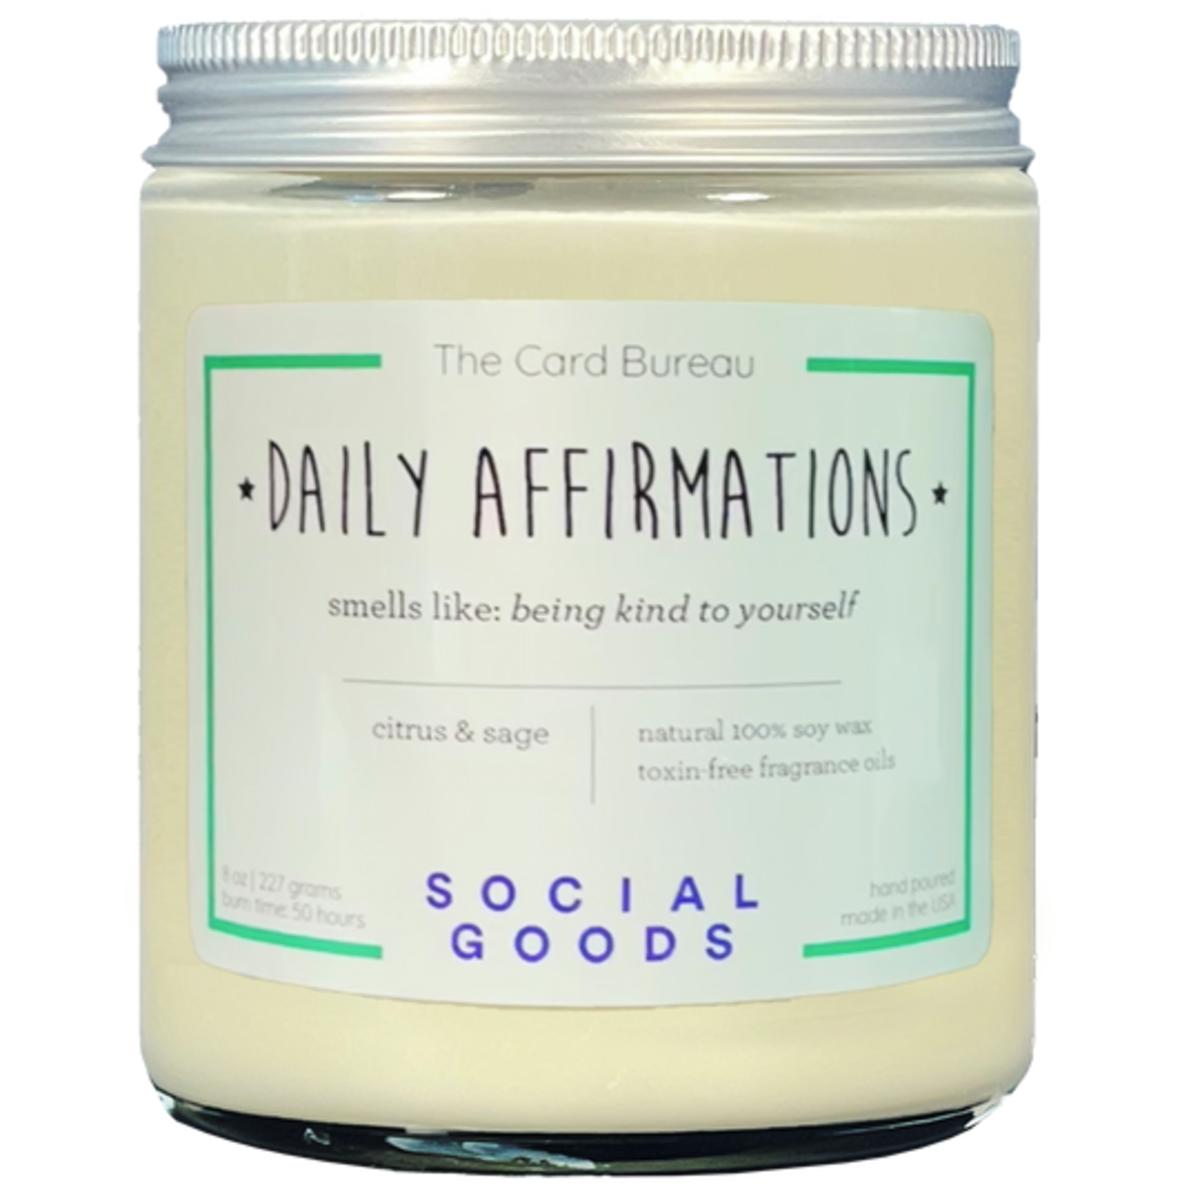 Everyday Affirmation Candles – The Fanciful Fox